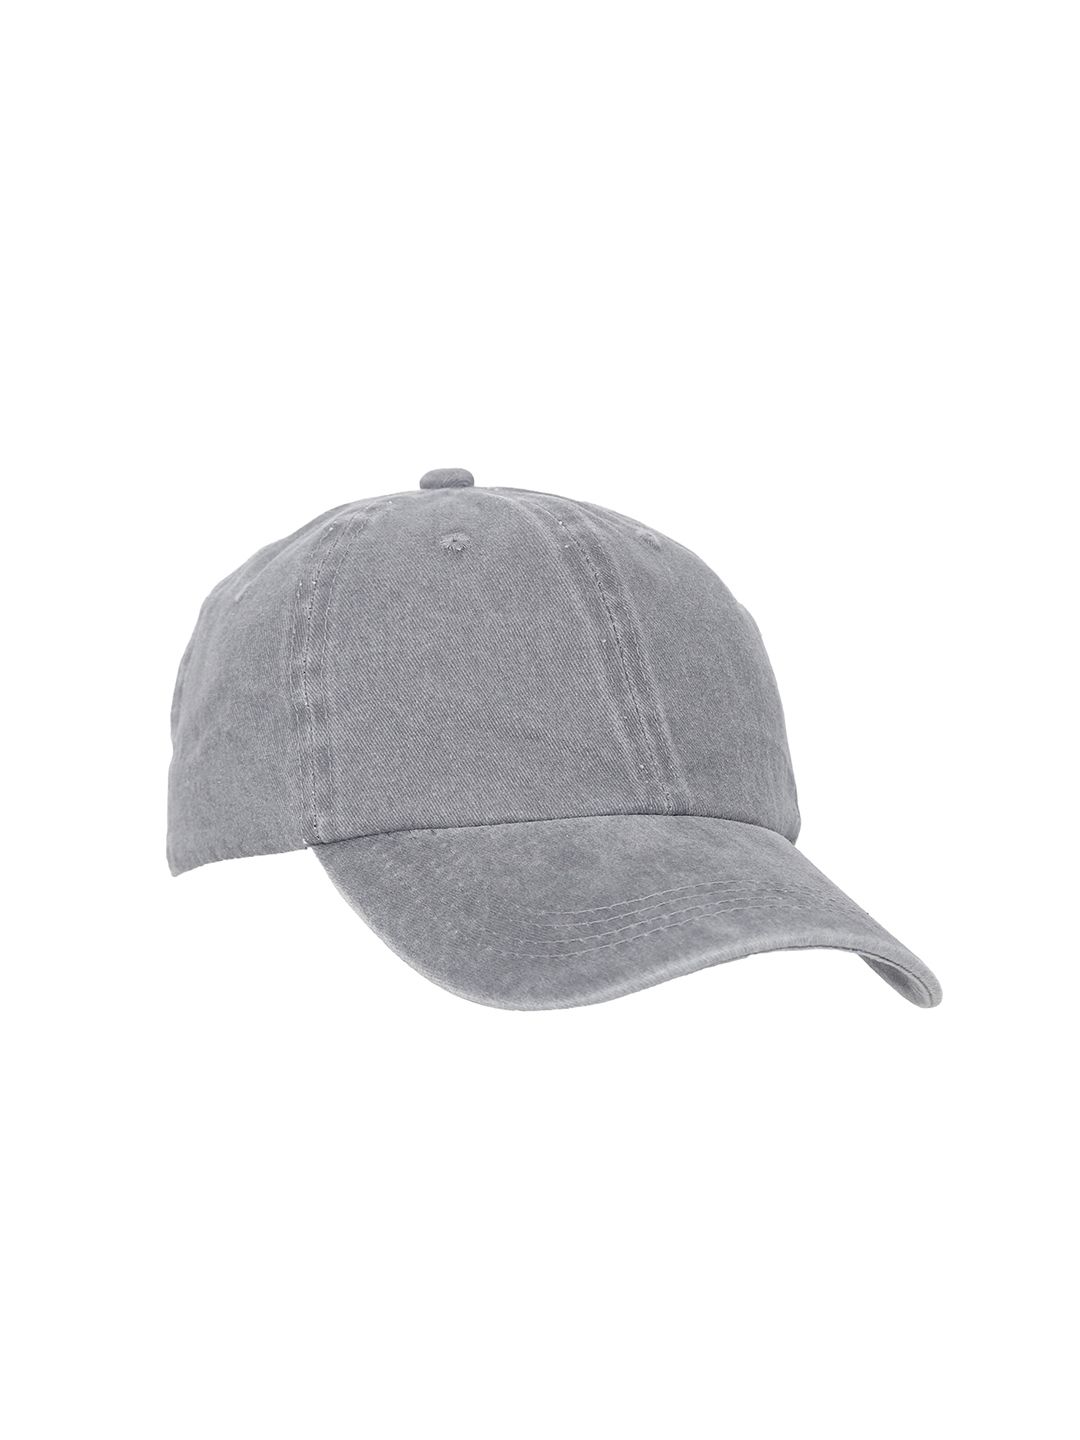 FabSeasons Women Grey Baseball Cap With Pony Hole Price in India